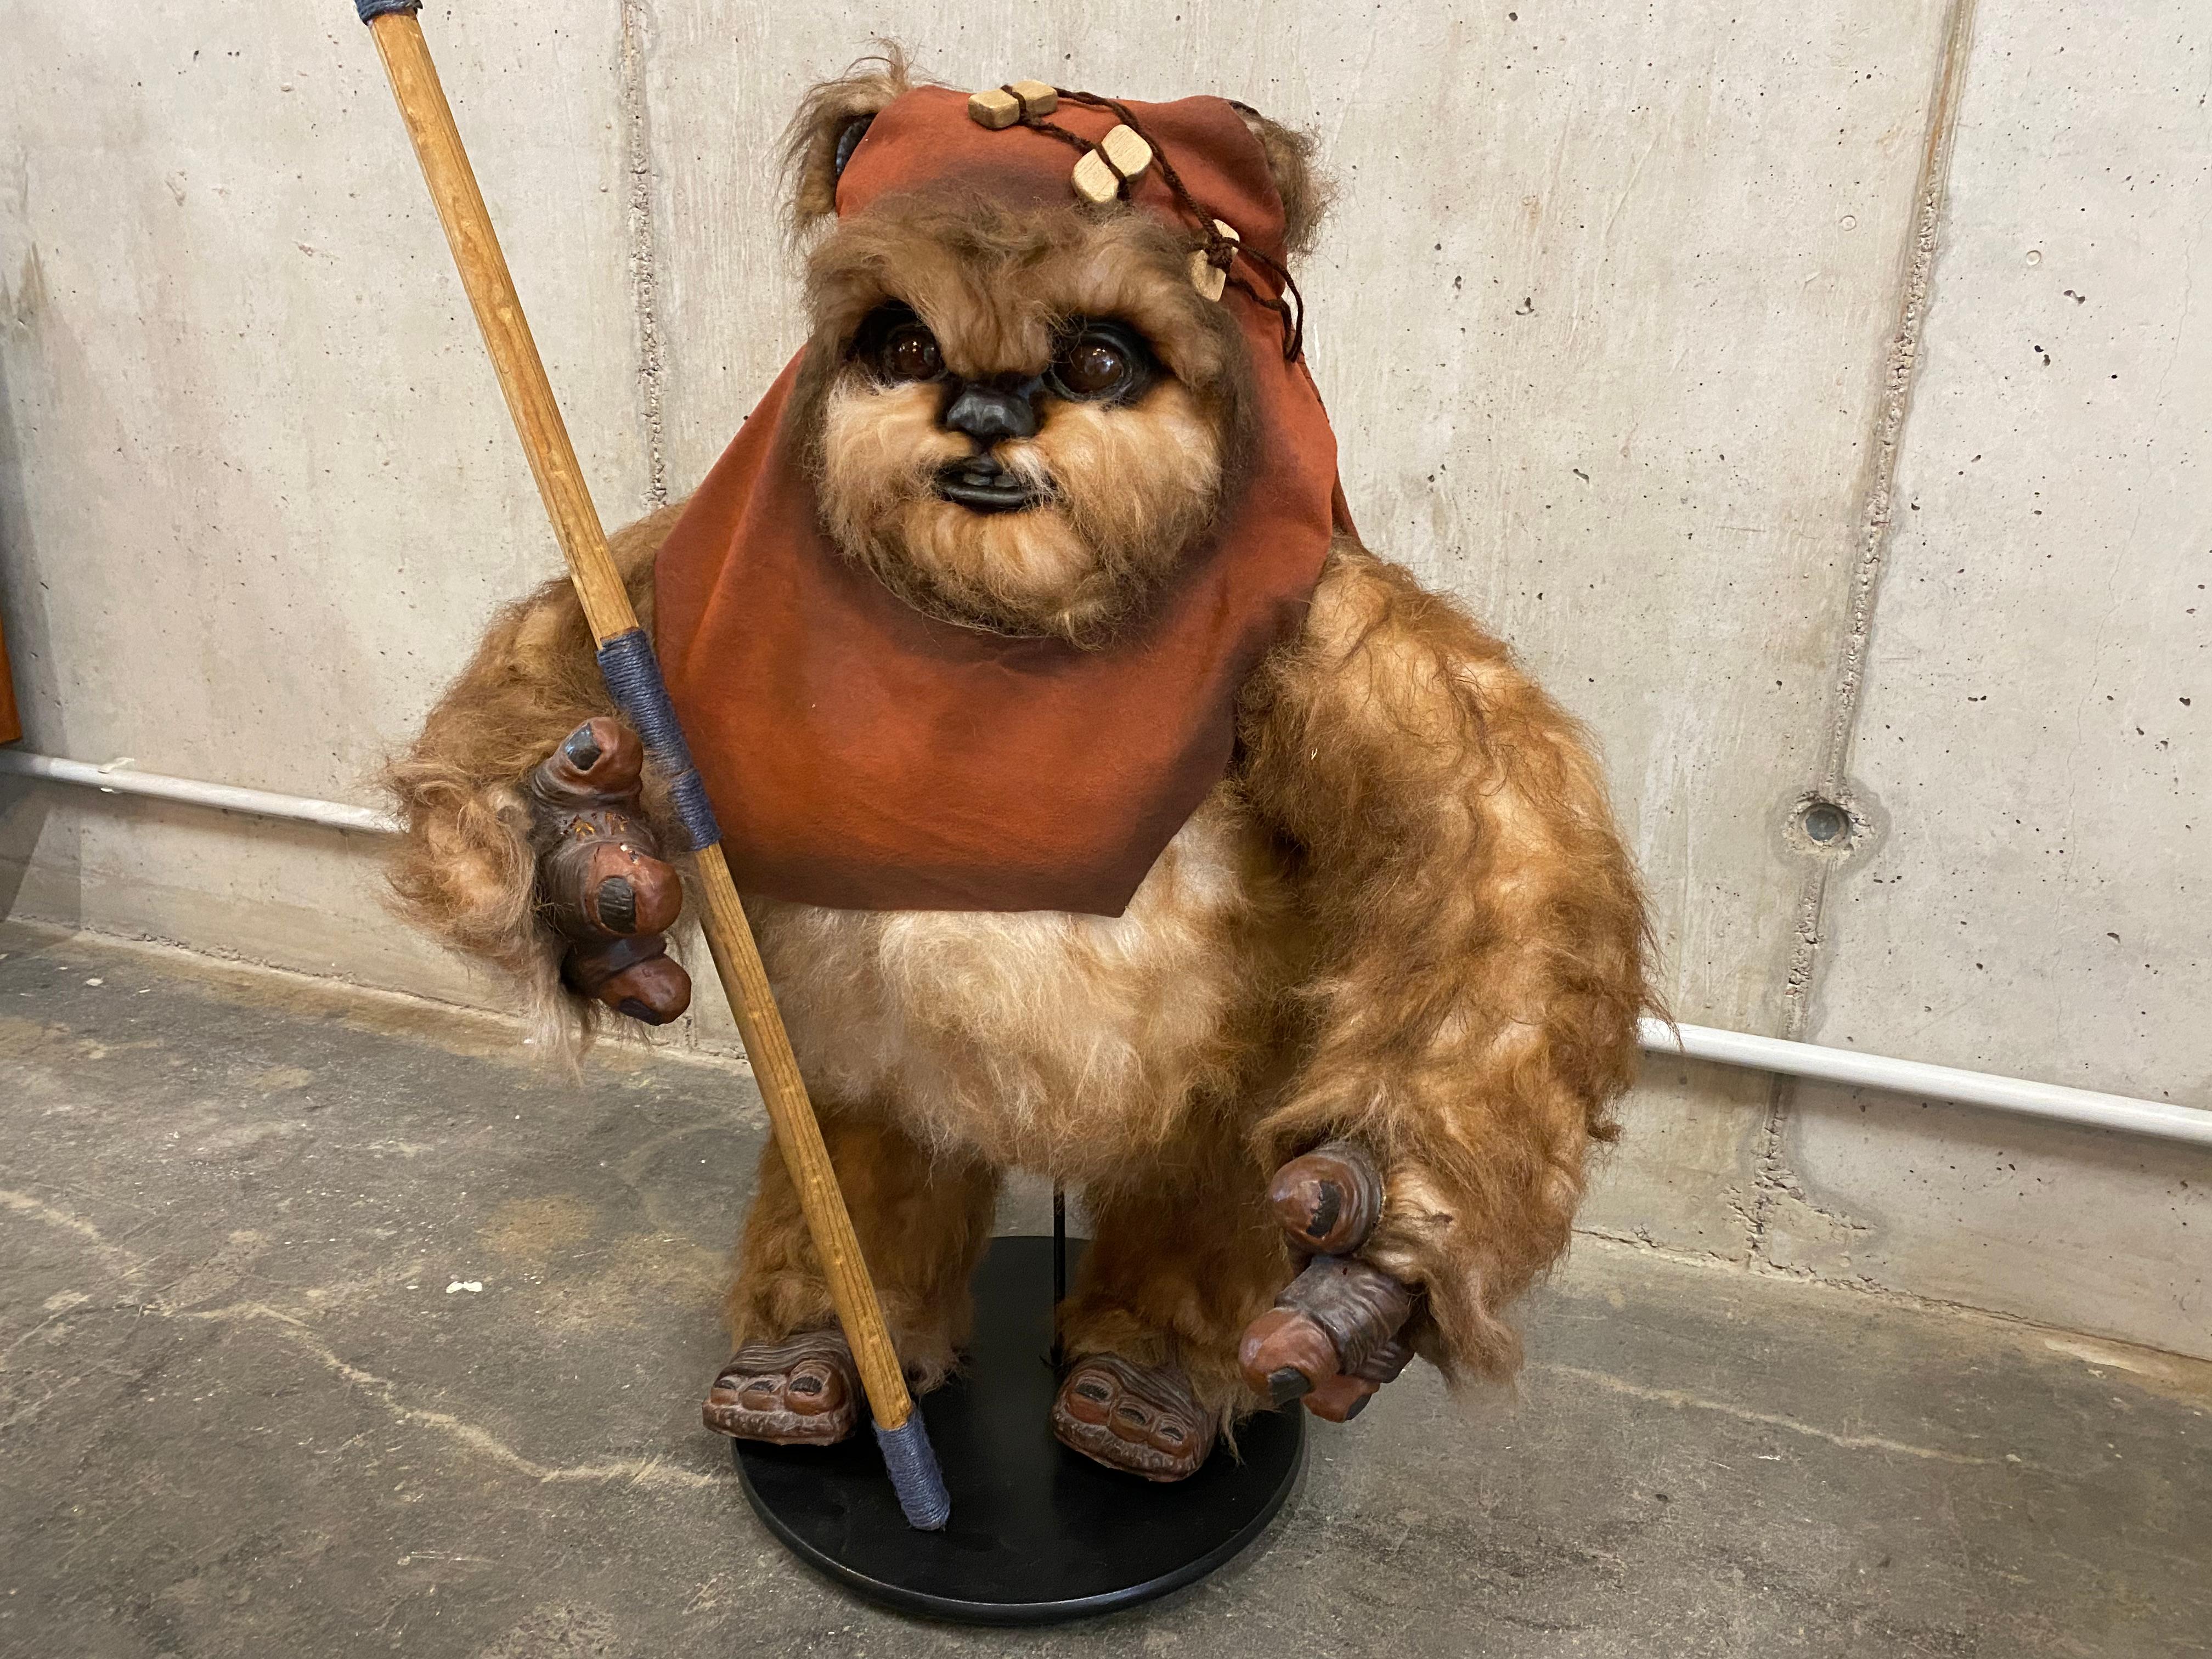 Life Size Wicket Ewok Figure, Edition of 50 Pieces, Star Wars Photo  Requisite